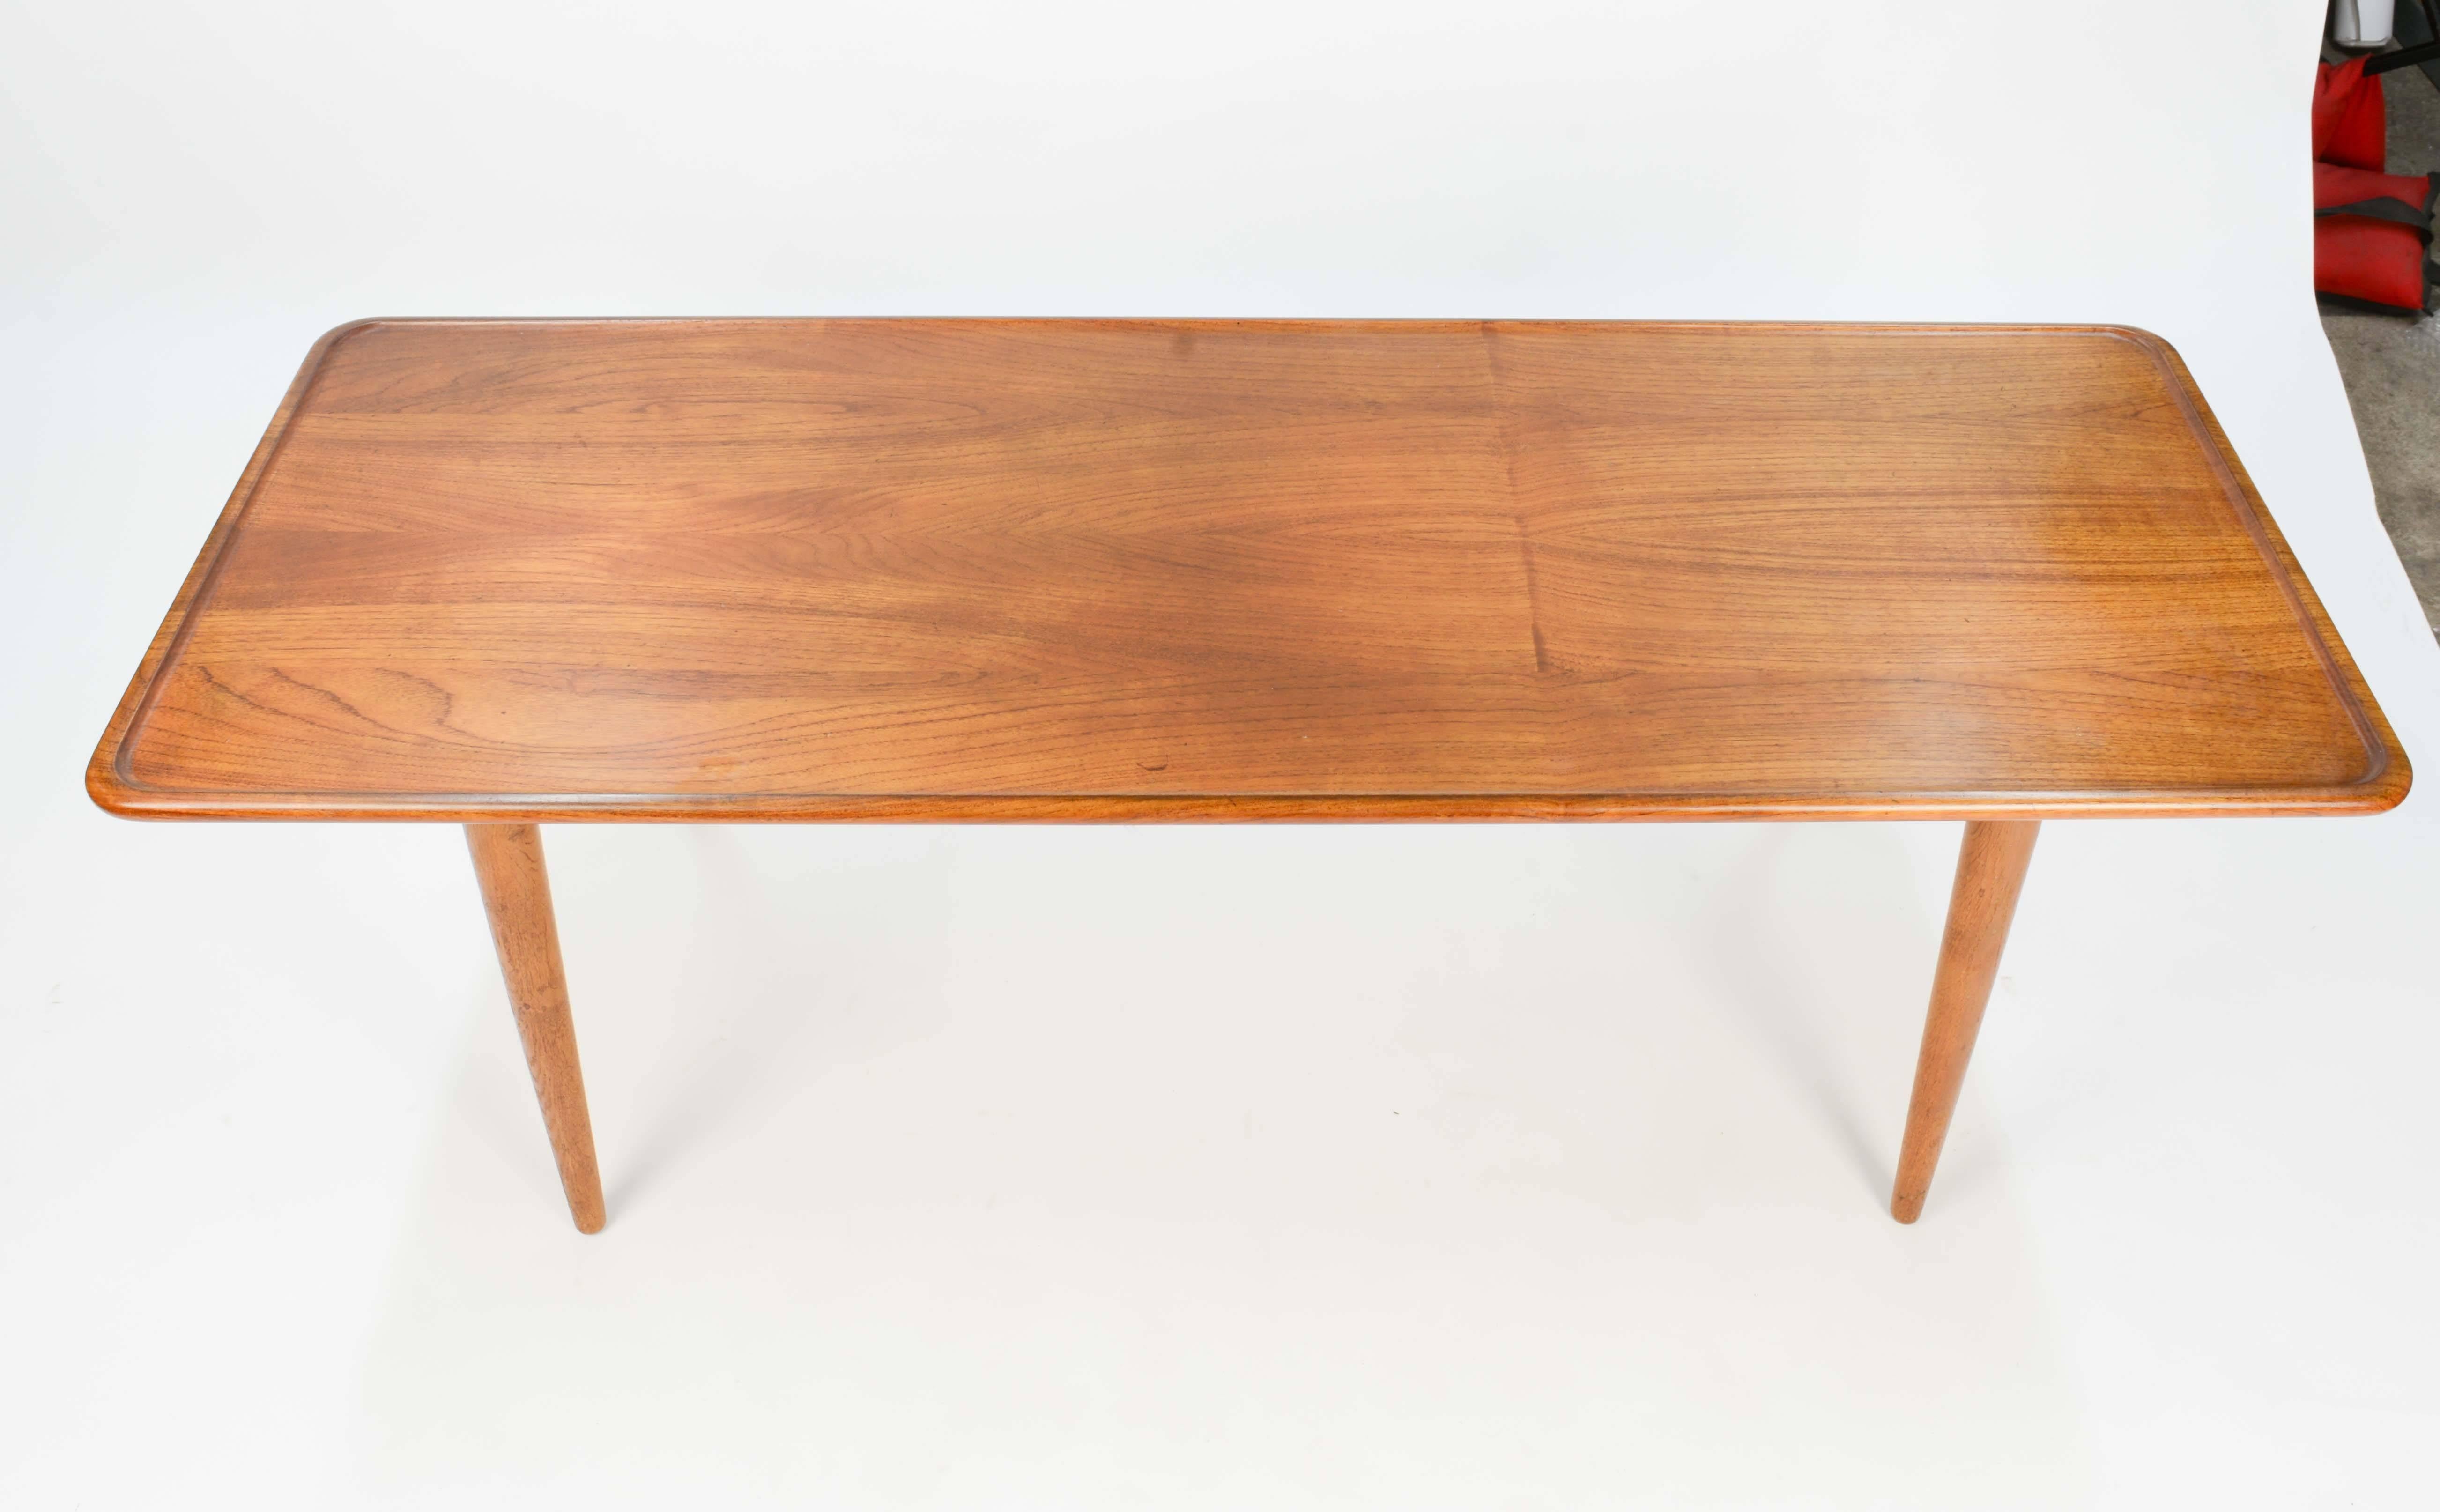 Hans Wegner designed coffee table for Andreas Tuck of Denmark. Having a sculpted teak lip top on oak legs. Table has finely detailed wood craftmanship and graining. It is branded with the Tuck label and Wegner name.